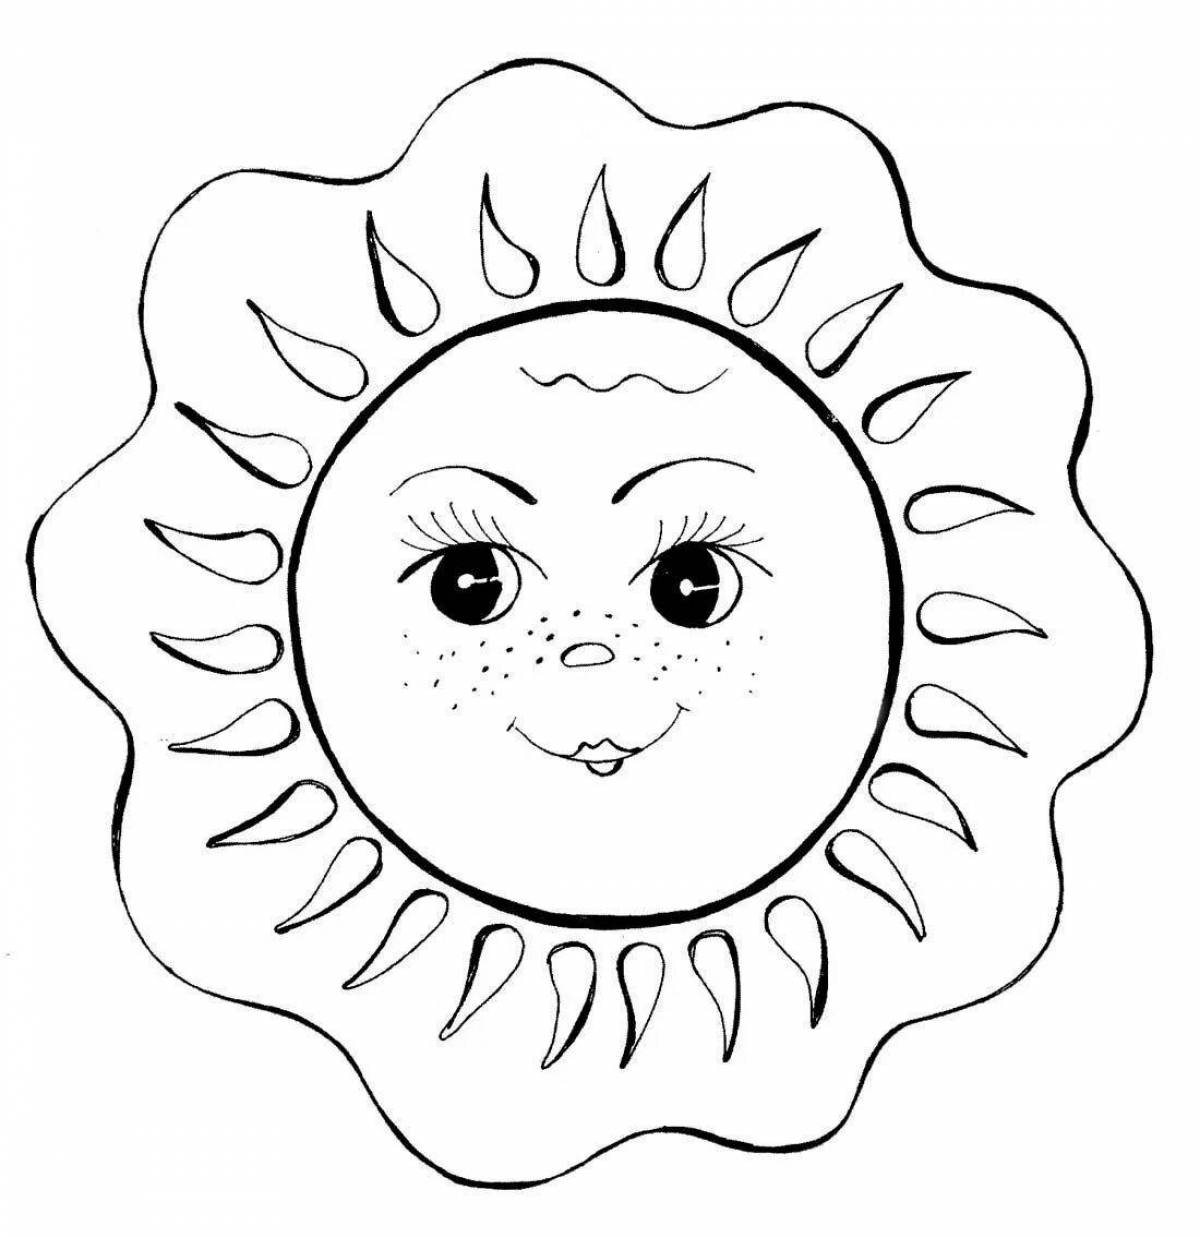 Happy coloring sun without rays